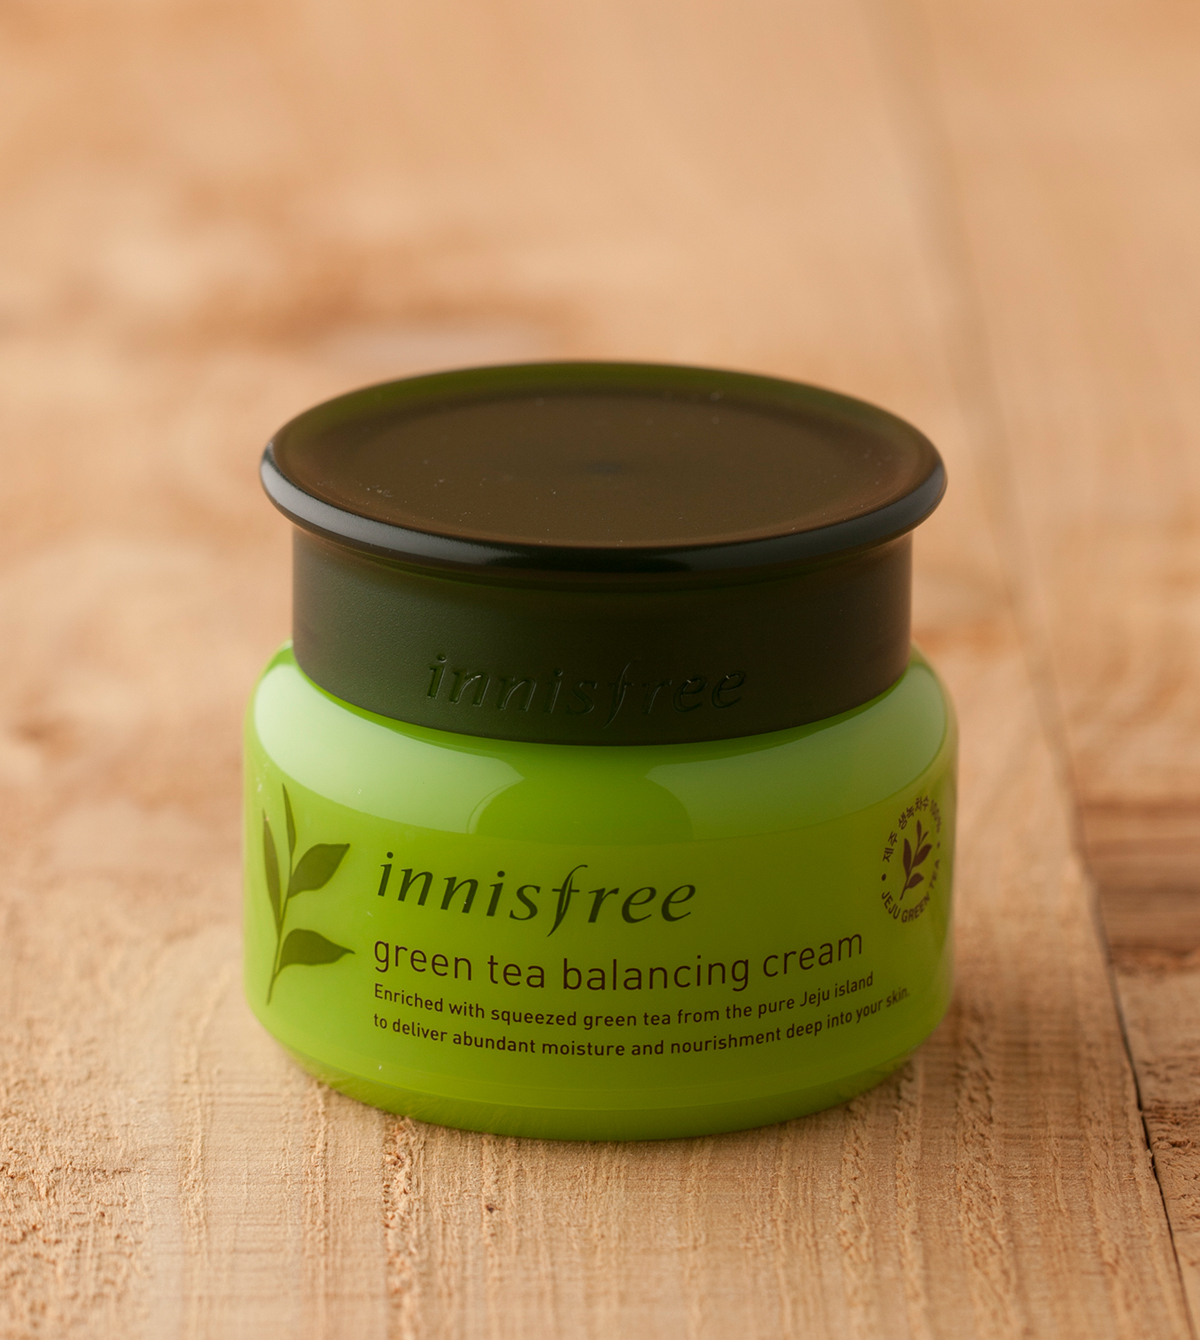 Innisfree Green Tea Balancing Cream - 12 Skin Care Products from Innisfree India to Stock in 2018 - Check out Reviews & Price